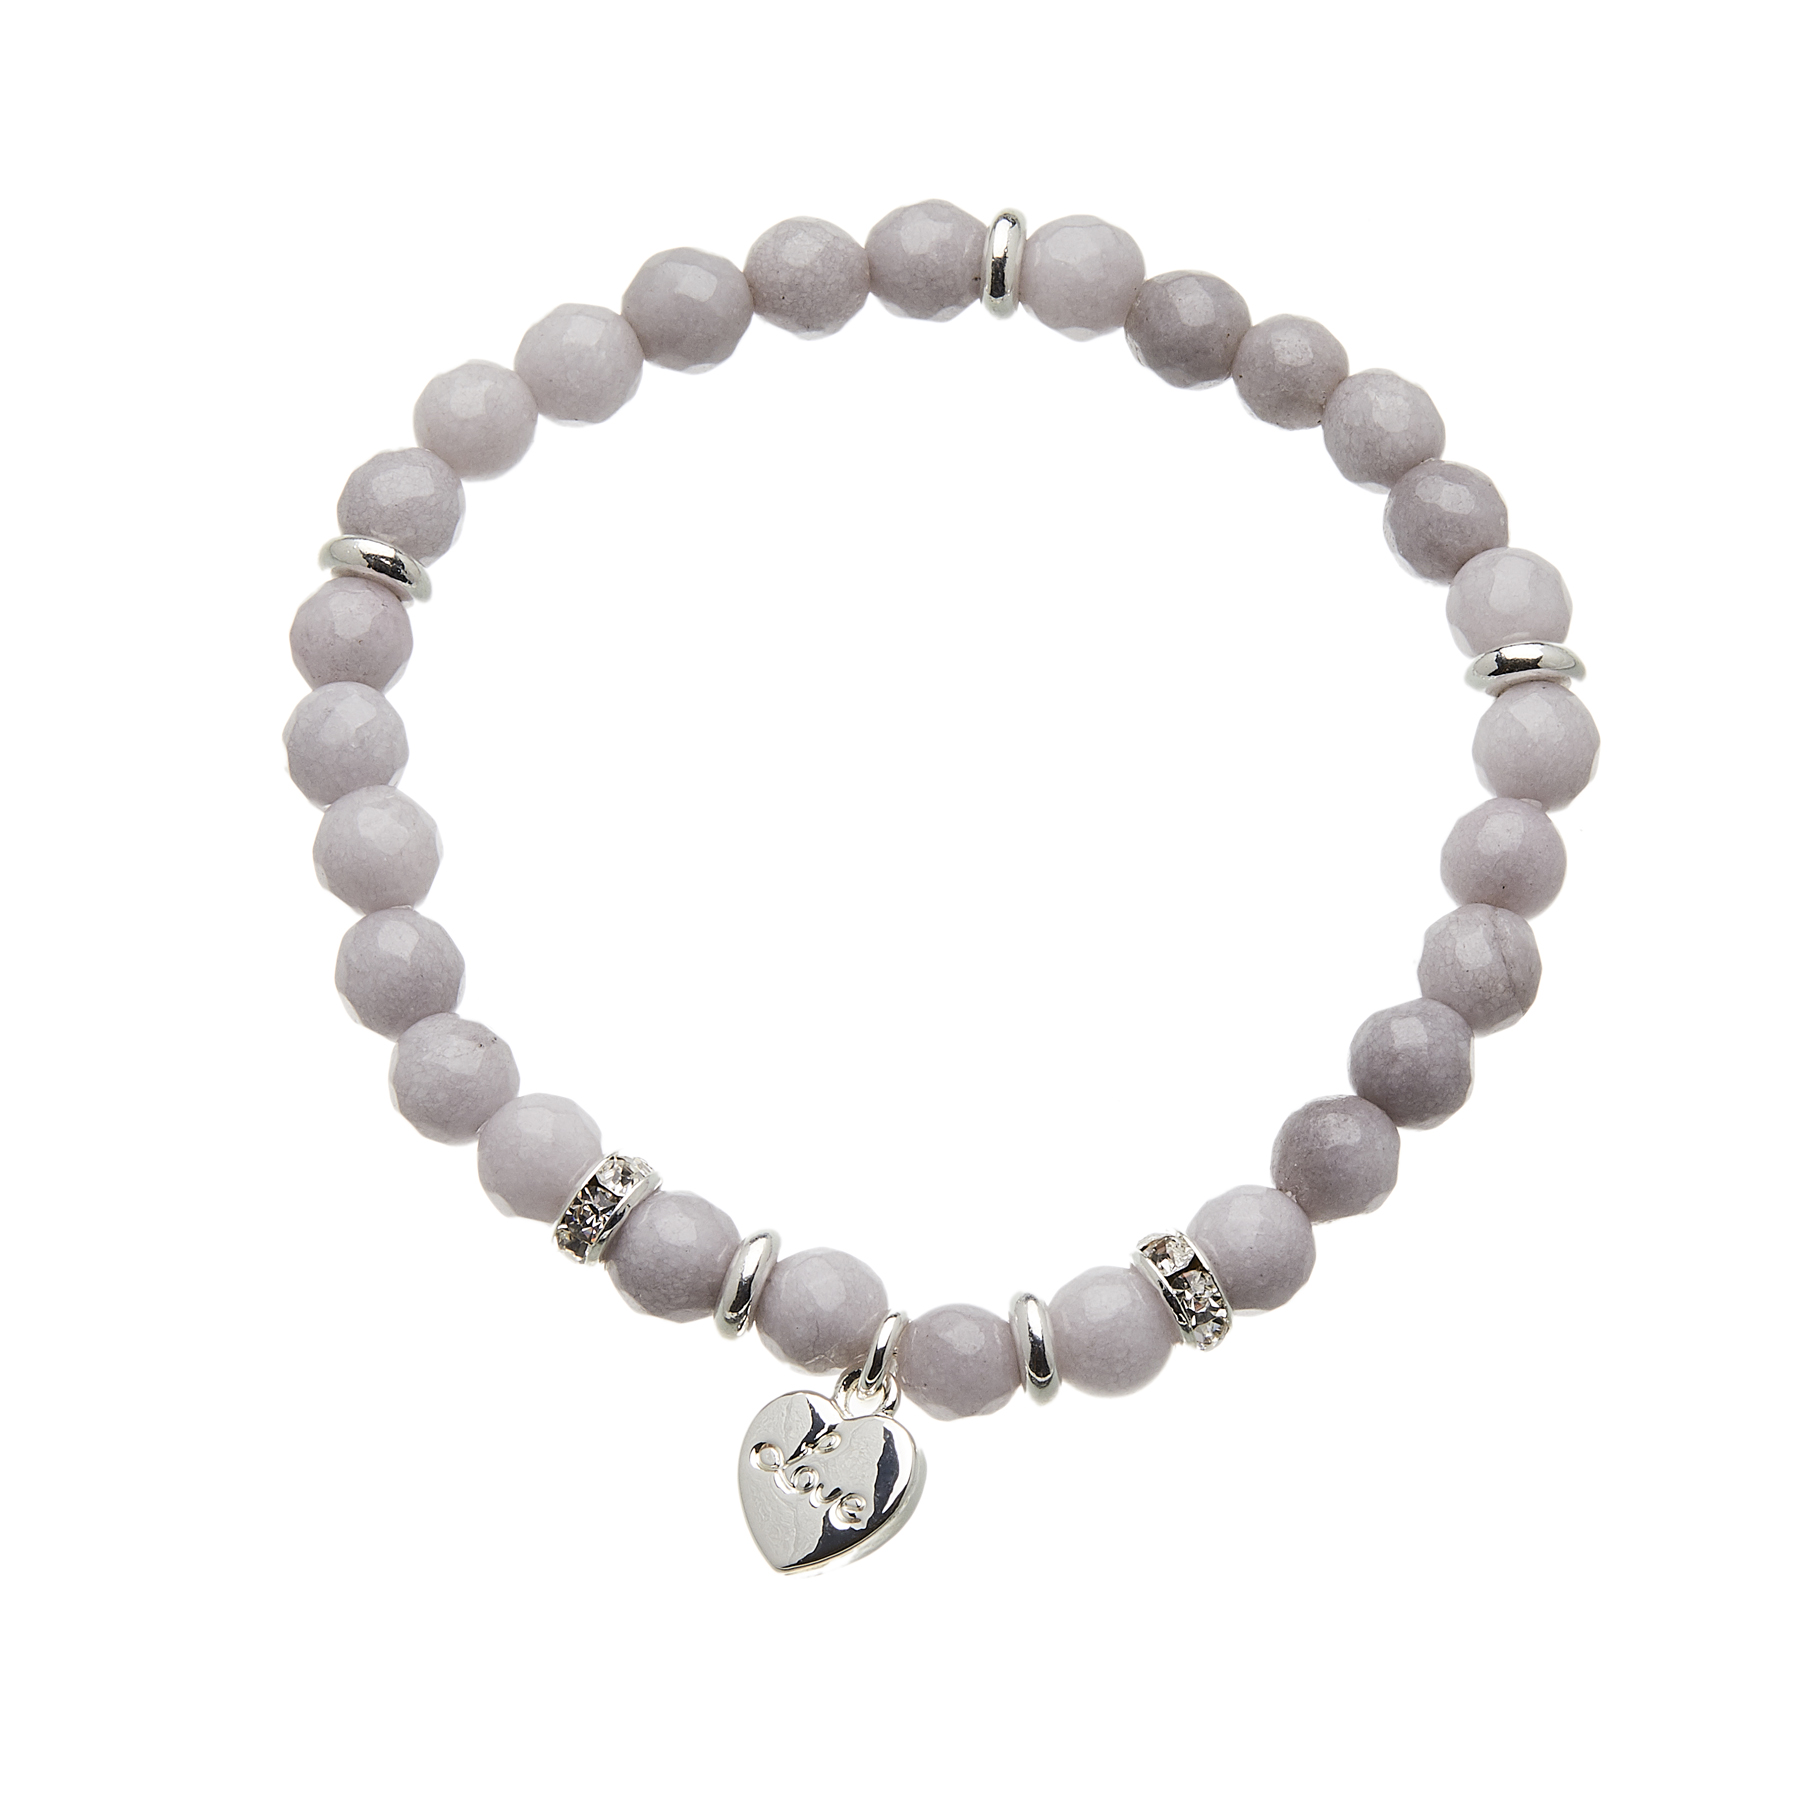 Facet grey jade beaded Bracelet with silver heart and crystals - Rae G05